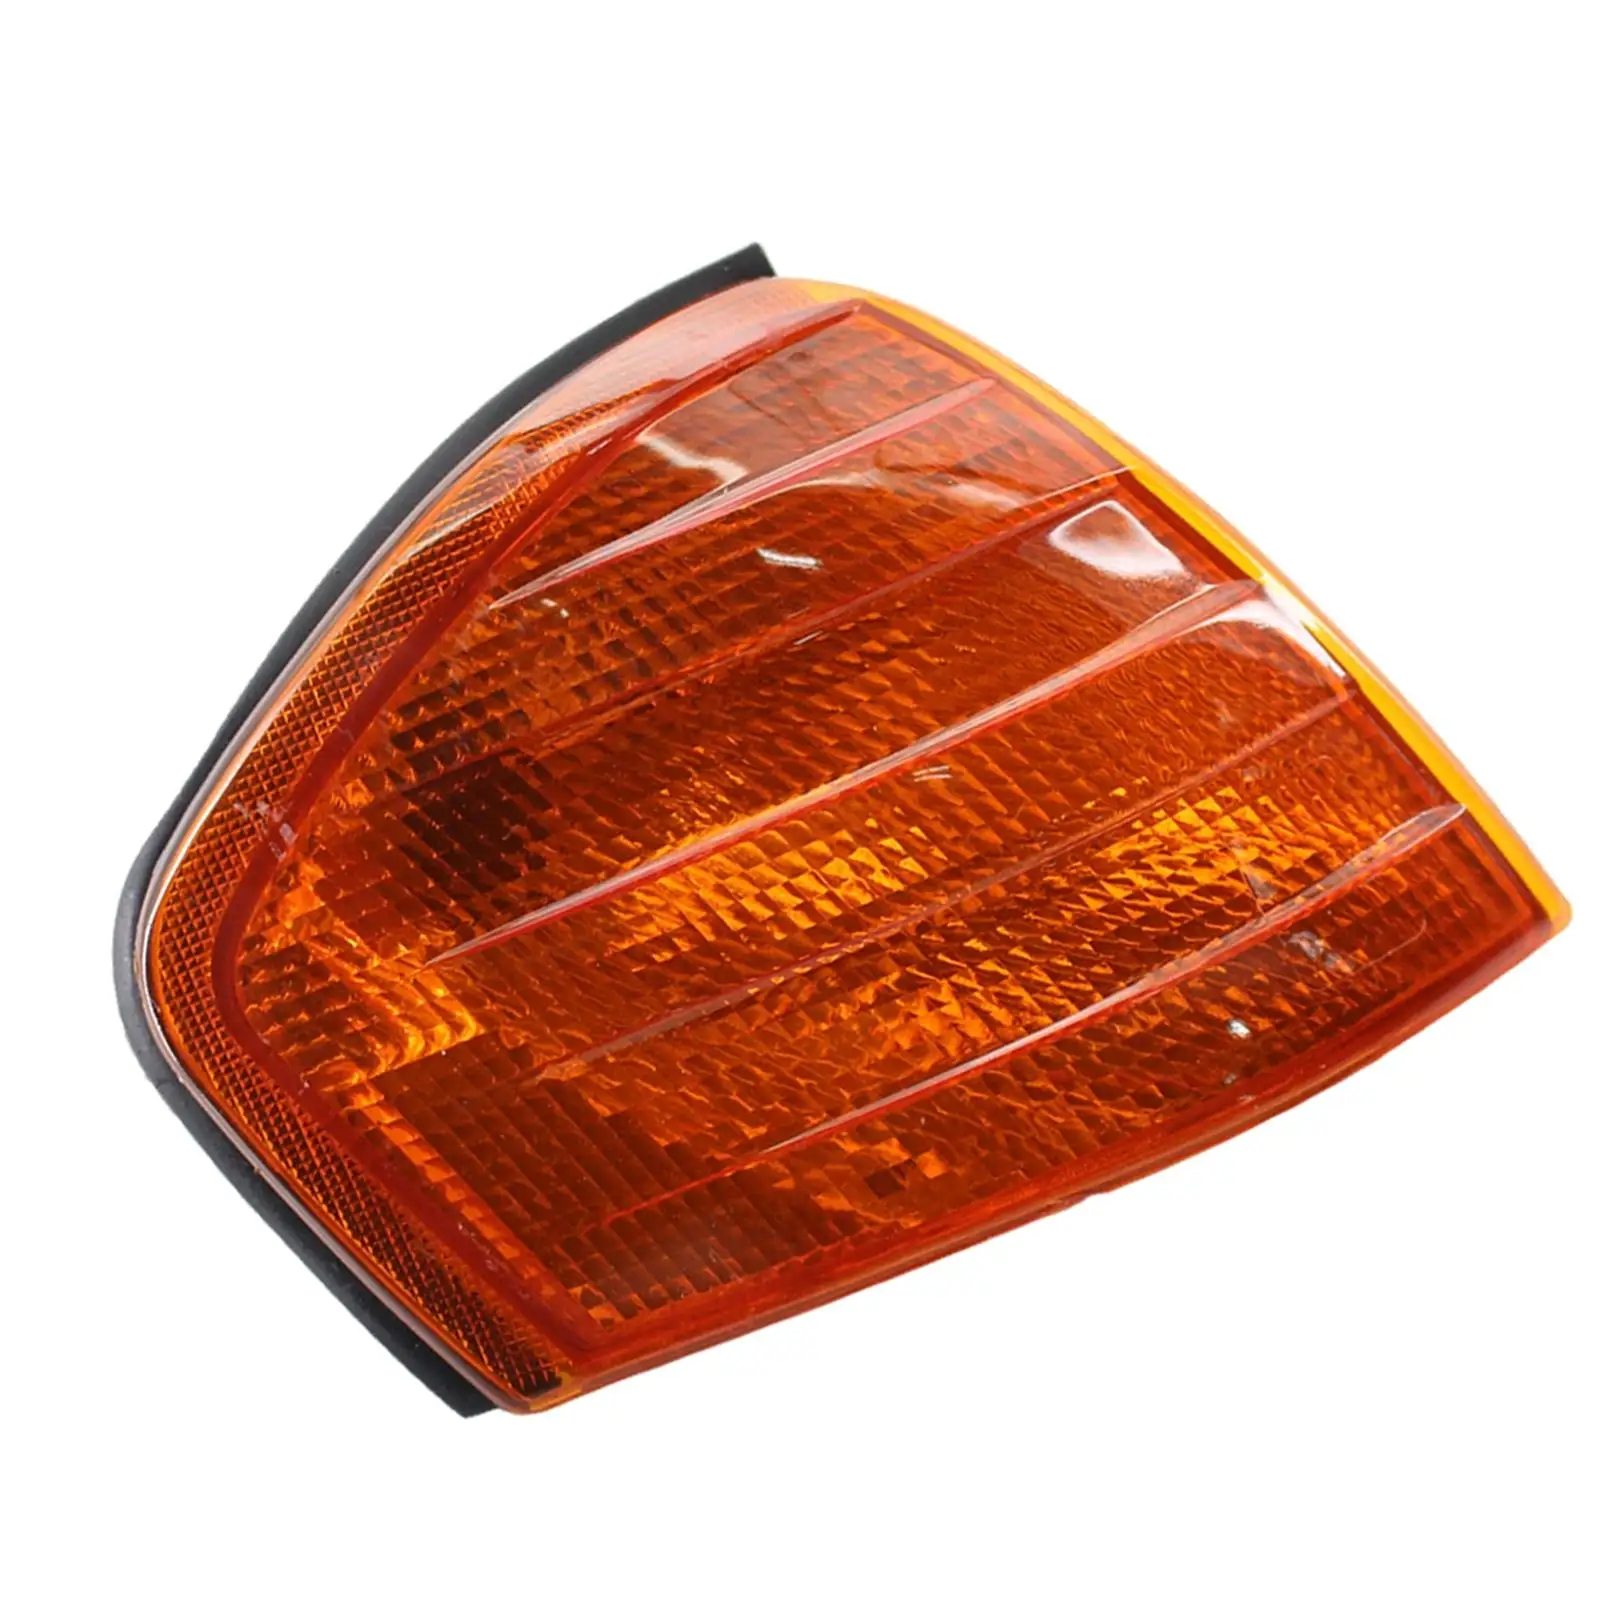 SODIAL Signal Right Corner Lamp Steering Lamp Suitable For 1994-2000 Years Mercedes-Benz W202 C-Class W202 2028261243 